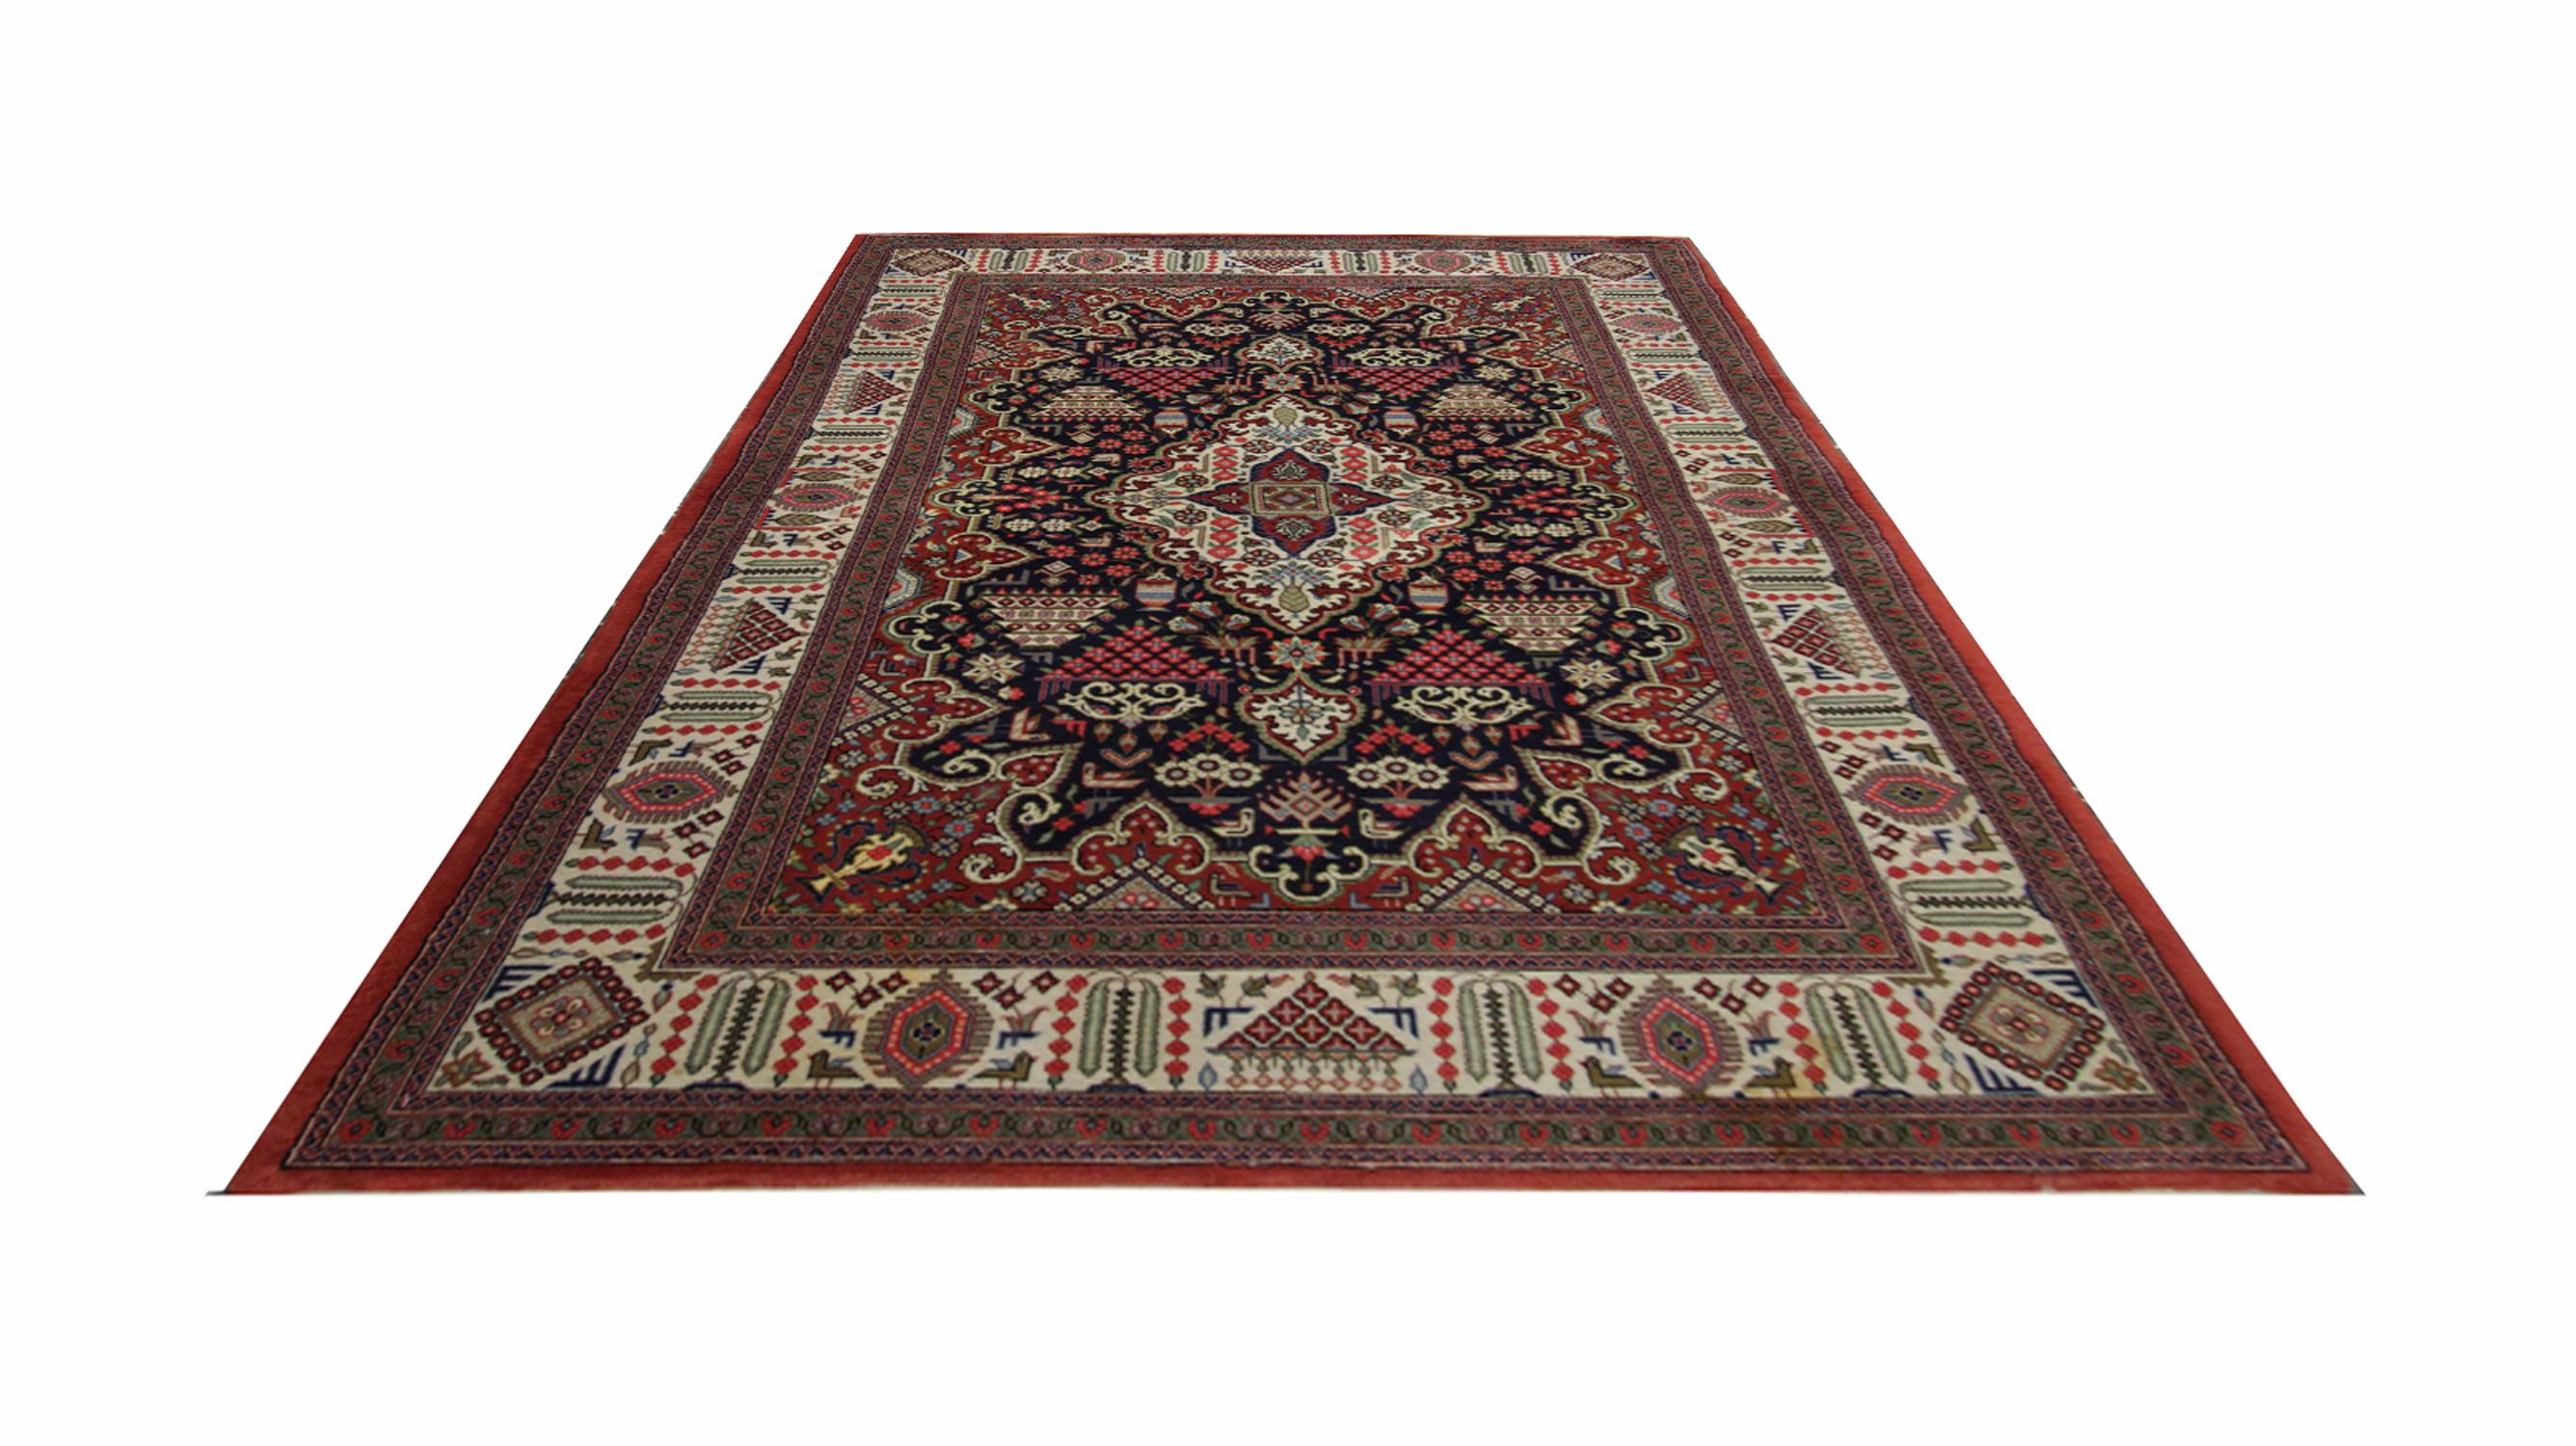 This elegantly woven wool carpet was constructed by hand in the 1995s. The central design has been woven with an elegant central medallion and highly decorative surrounding design. Deep red, brown, green, and blue make up the main colour palette for